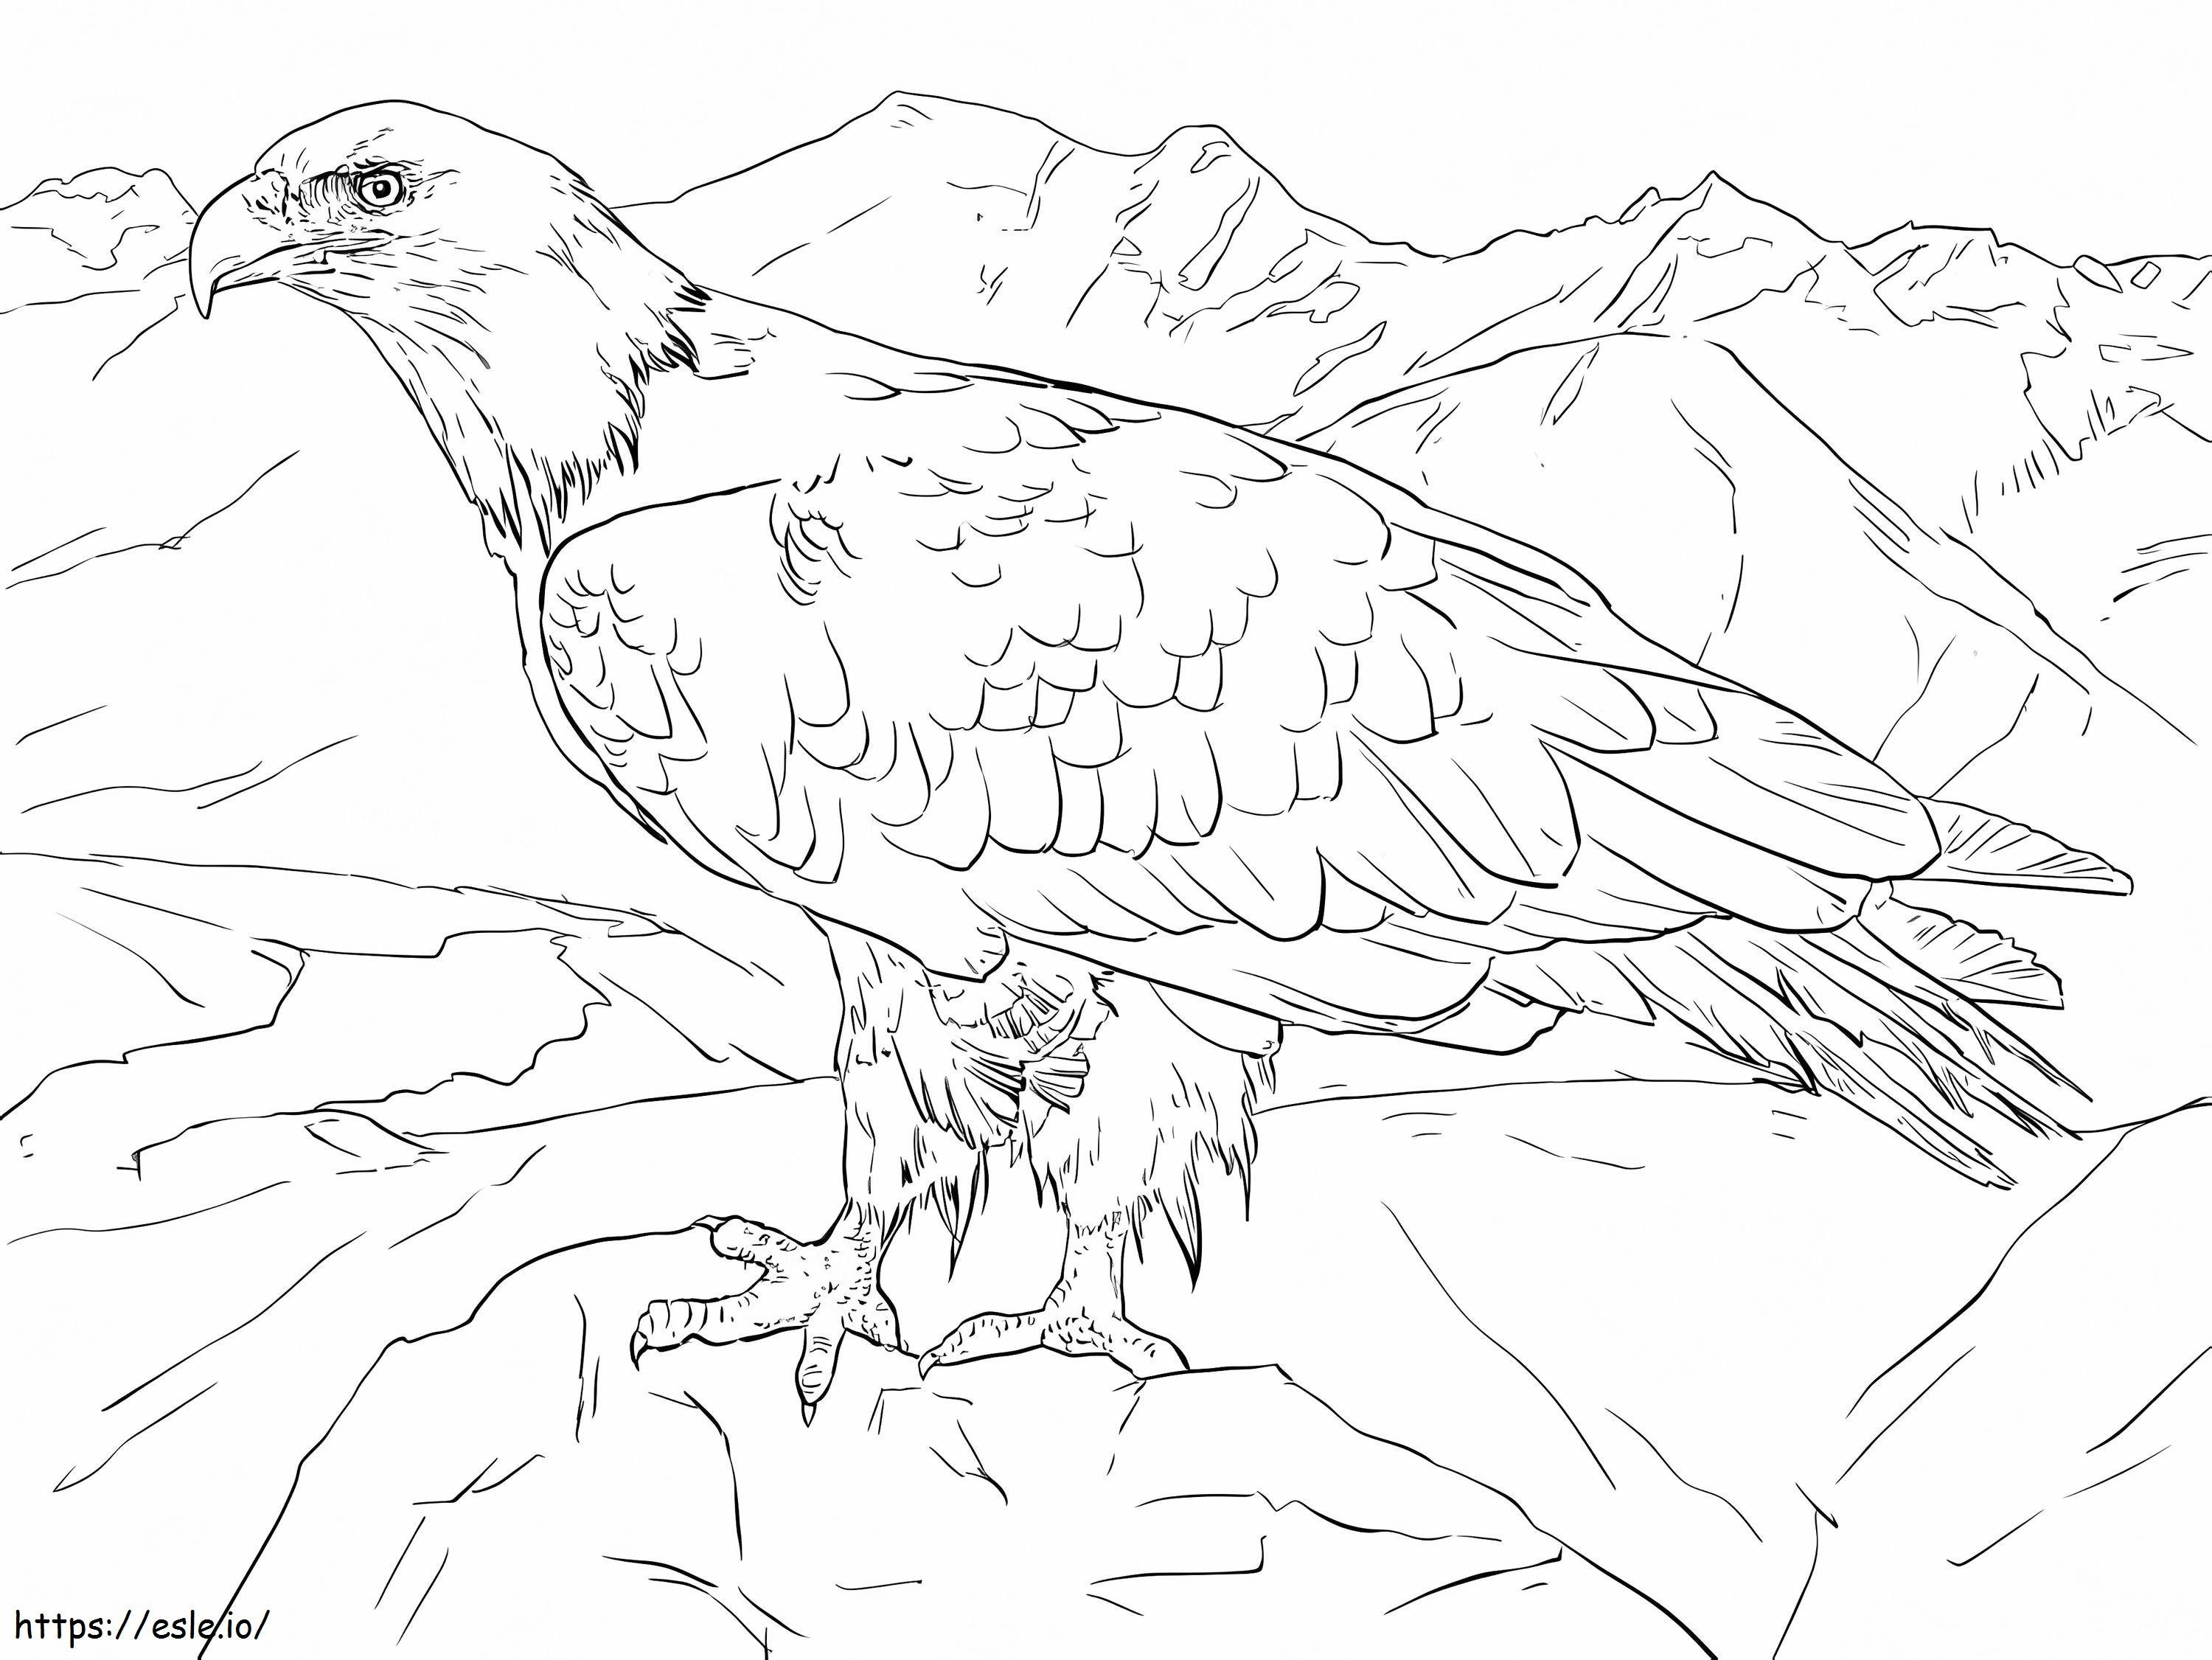 Ald Eagle From Alaska coloring page